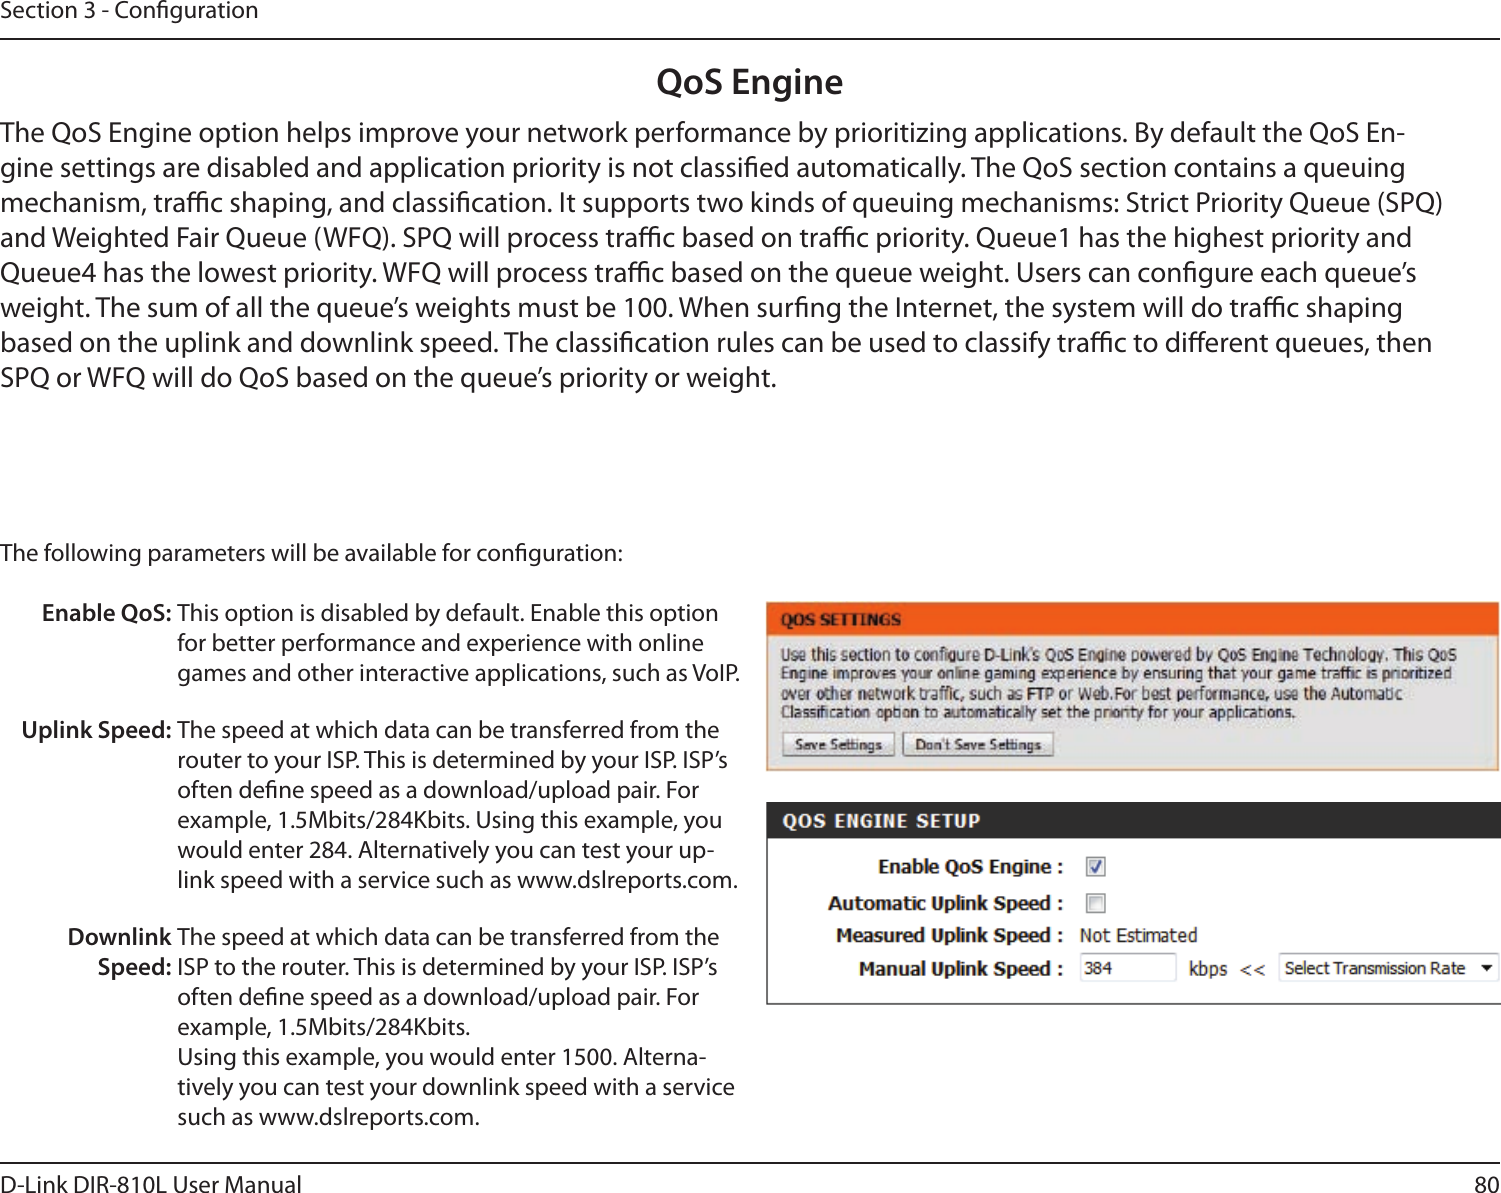 80D-Link DIR-810L User ManualSection 3 - CongurationQoS EngineThe QoS Engine option helps improve your network performance by prioritizing applications. By default the QoS En-gine settings are disabled and application priority is not classied automatically. The QoS section contains a queuing mechanism, trac shaping, and classication. It supports two kinds of queuing mechanisms: Strict Priority Queue (SPQ) and Weighted Fair Queue (WFQ). SPQ will process trac based on trac priority. Queue1 has the highest priority and Queue4 has the lowest priority. WFQ will process trac based on the queue weight. Users can congure each queue’s weight. The sum of all the queue’s weights must be 100. When surng the Internet, the system will do trac shaping based on the uplink and downlink speed. The classication rules can be used to classify trac to dierent queues, then SPQ or WFQ will do QoS based on the queue’s priority or weight.The following parameters will be available for conguration:Enable QoS: This option is disabled by default. Enable this option for better performance and experience with online games and other interactive applications, such as VoIP.Uplink Speed: The speed at which data can be transferred from the router to your ISP. This is determined by your ISP. ISP’s often dene speed as a download/upload pair. For example, 1.5Mbits/284Kbits. Using this example, you would enter 284. Alternatively you can test your up-link speed with a service such as www.dslreports.com.Downlink Speed:The speed at which data can be transferred from the ISP to the router. This is determined by your ISP. ISP’s often dene speed as a download/upload pair. For example, 1.5Mbits/284Kbits. Using this example, you would enter 1500. Alterna-tively you can test your downlink speed with a service such as www.dslreports.com.